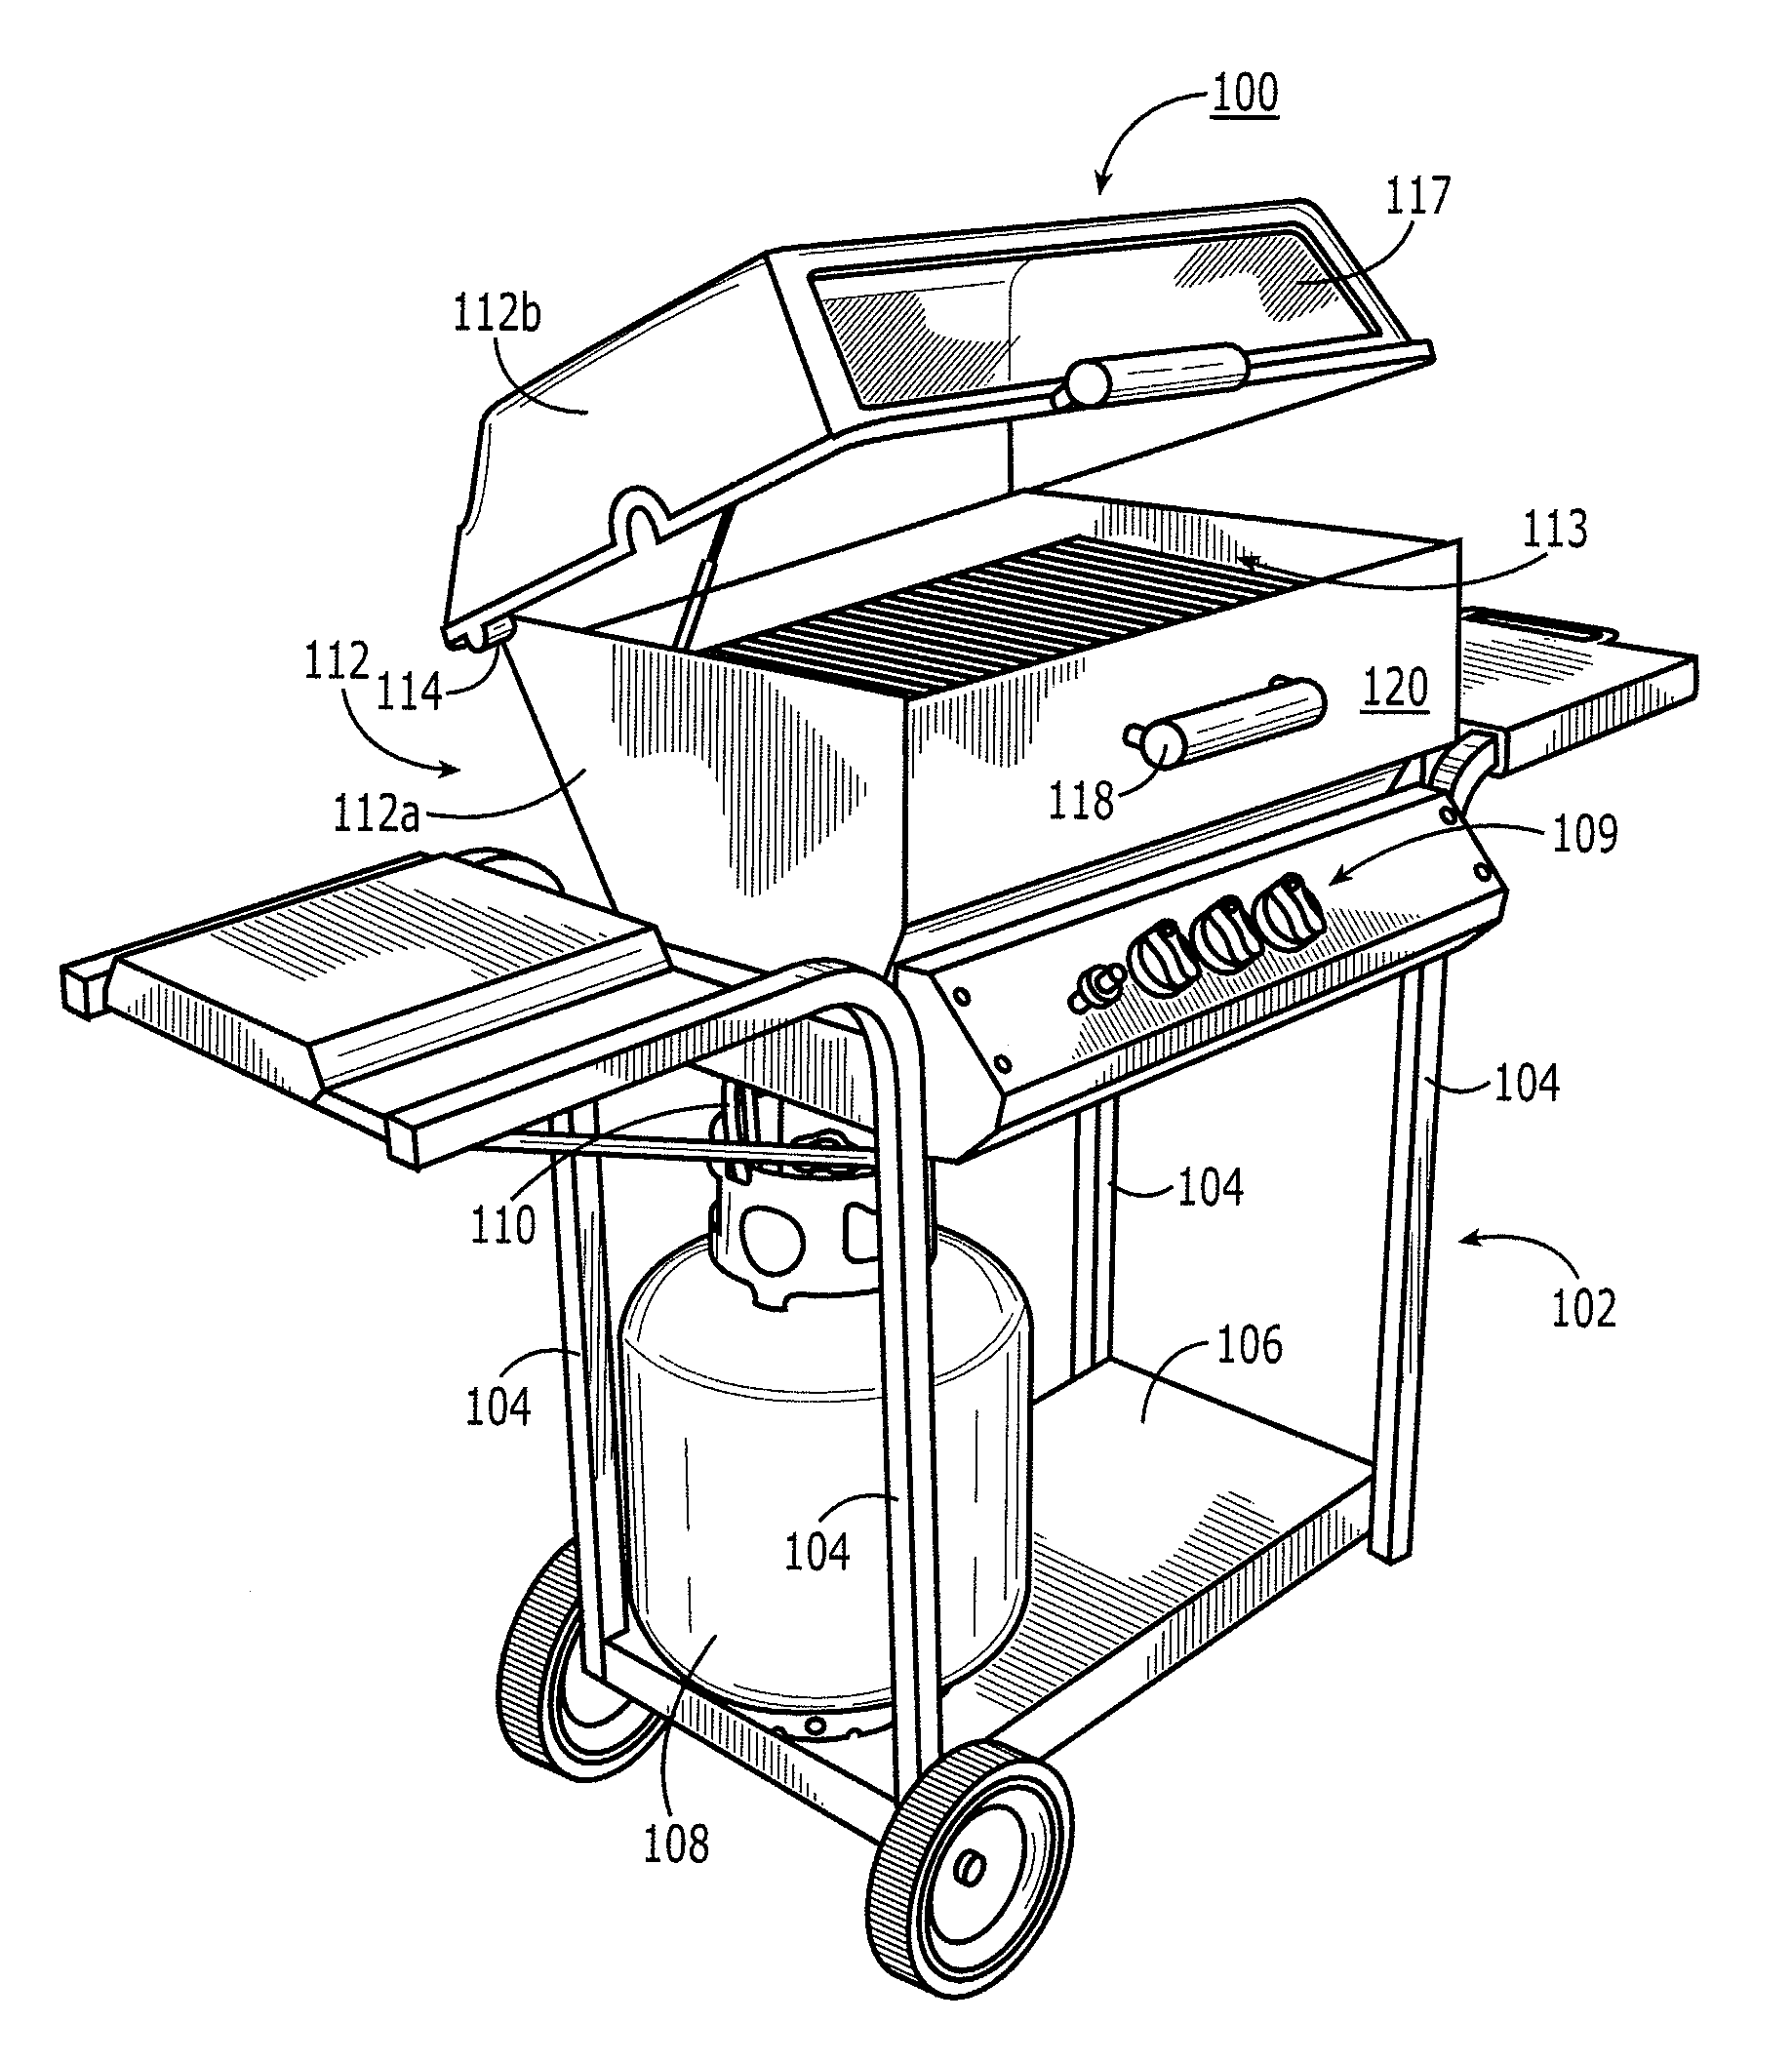 Cooking grill